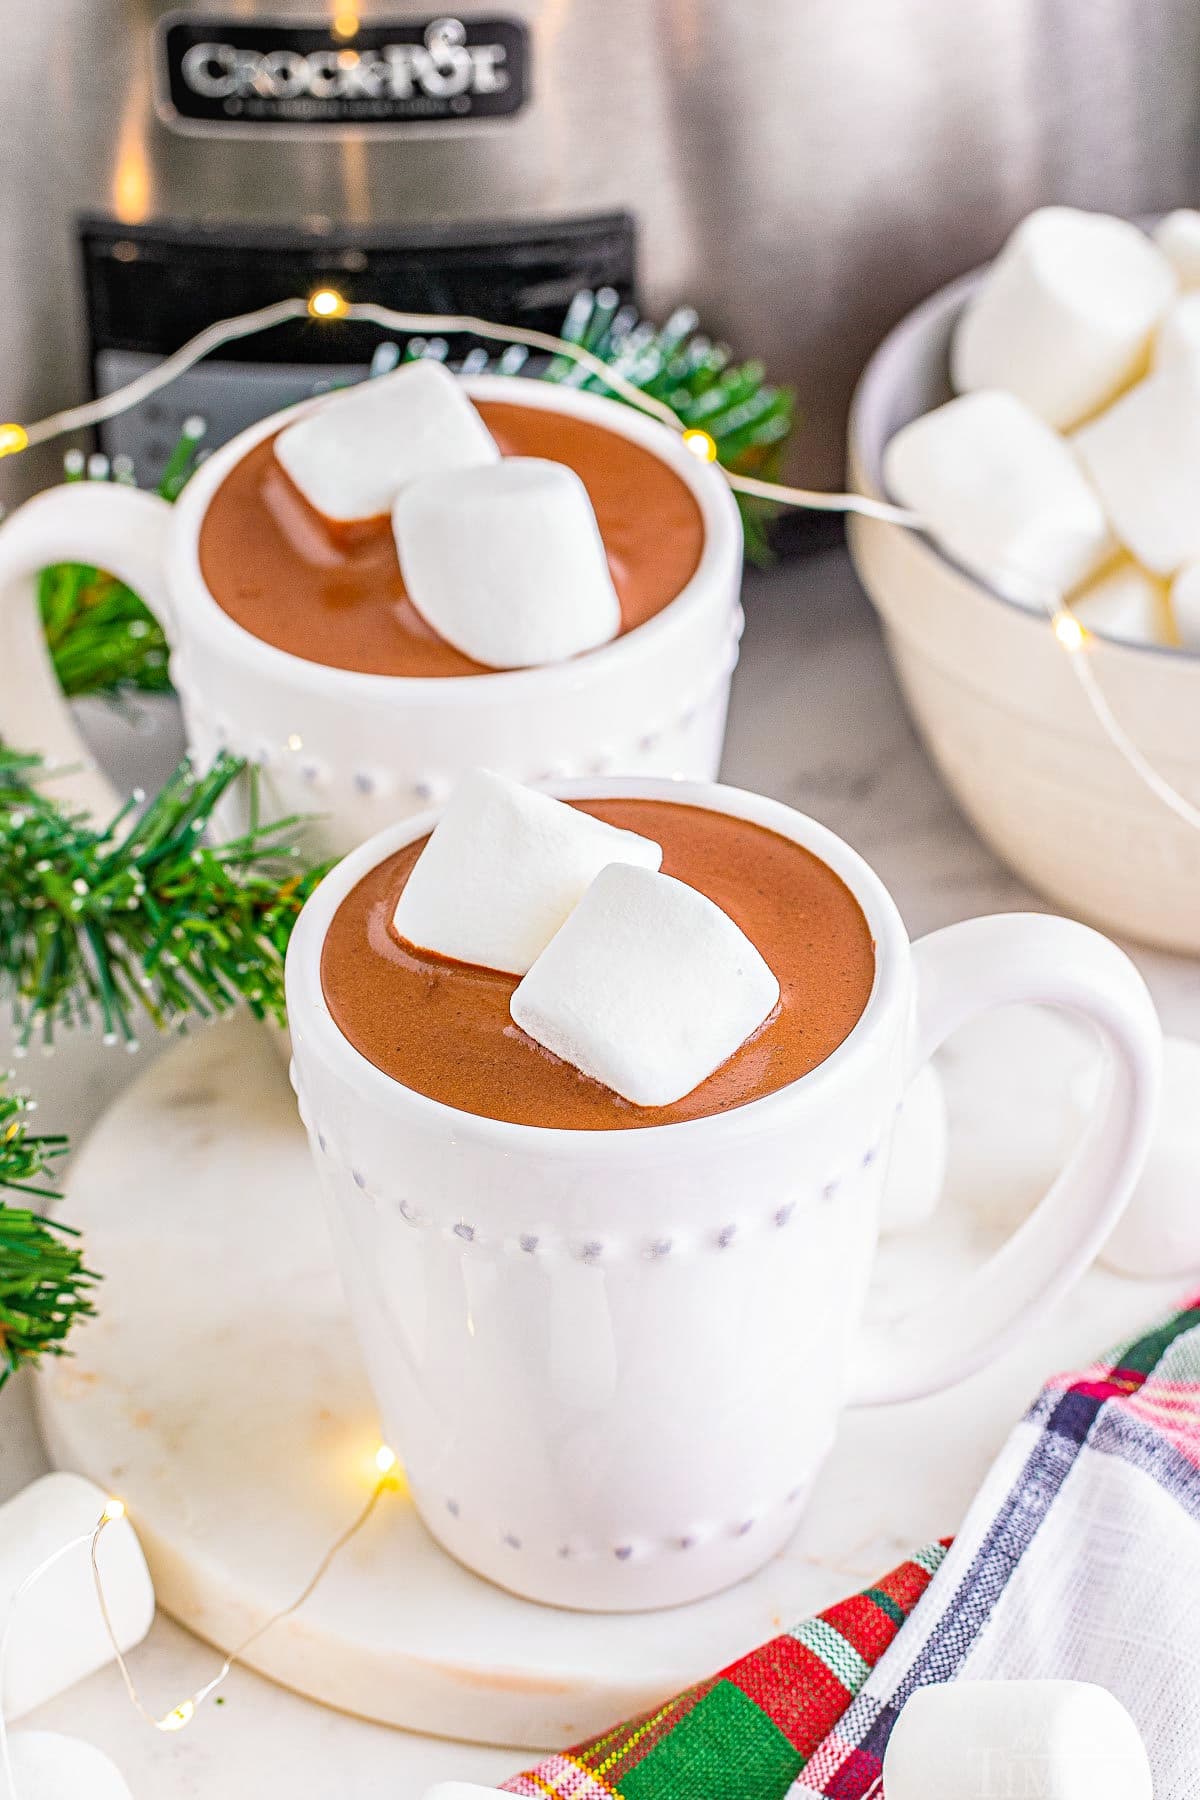 two cups of hot chocolate sitting in front of a silver crockpot and topped with two marshmallows each.